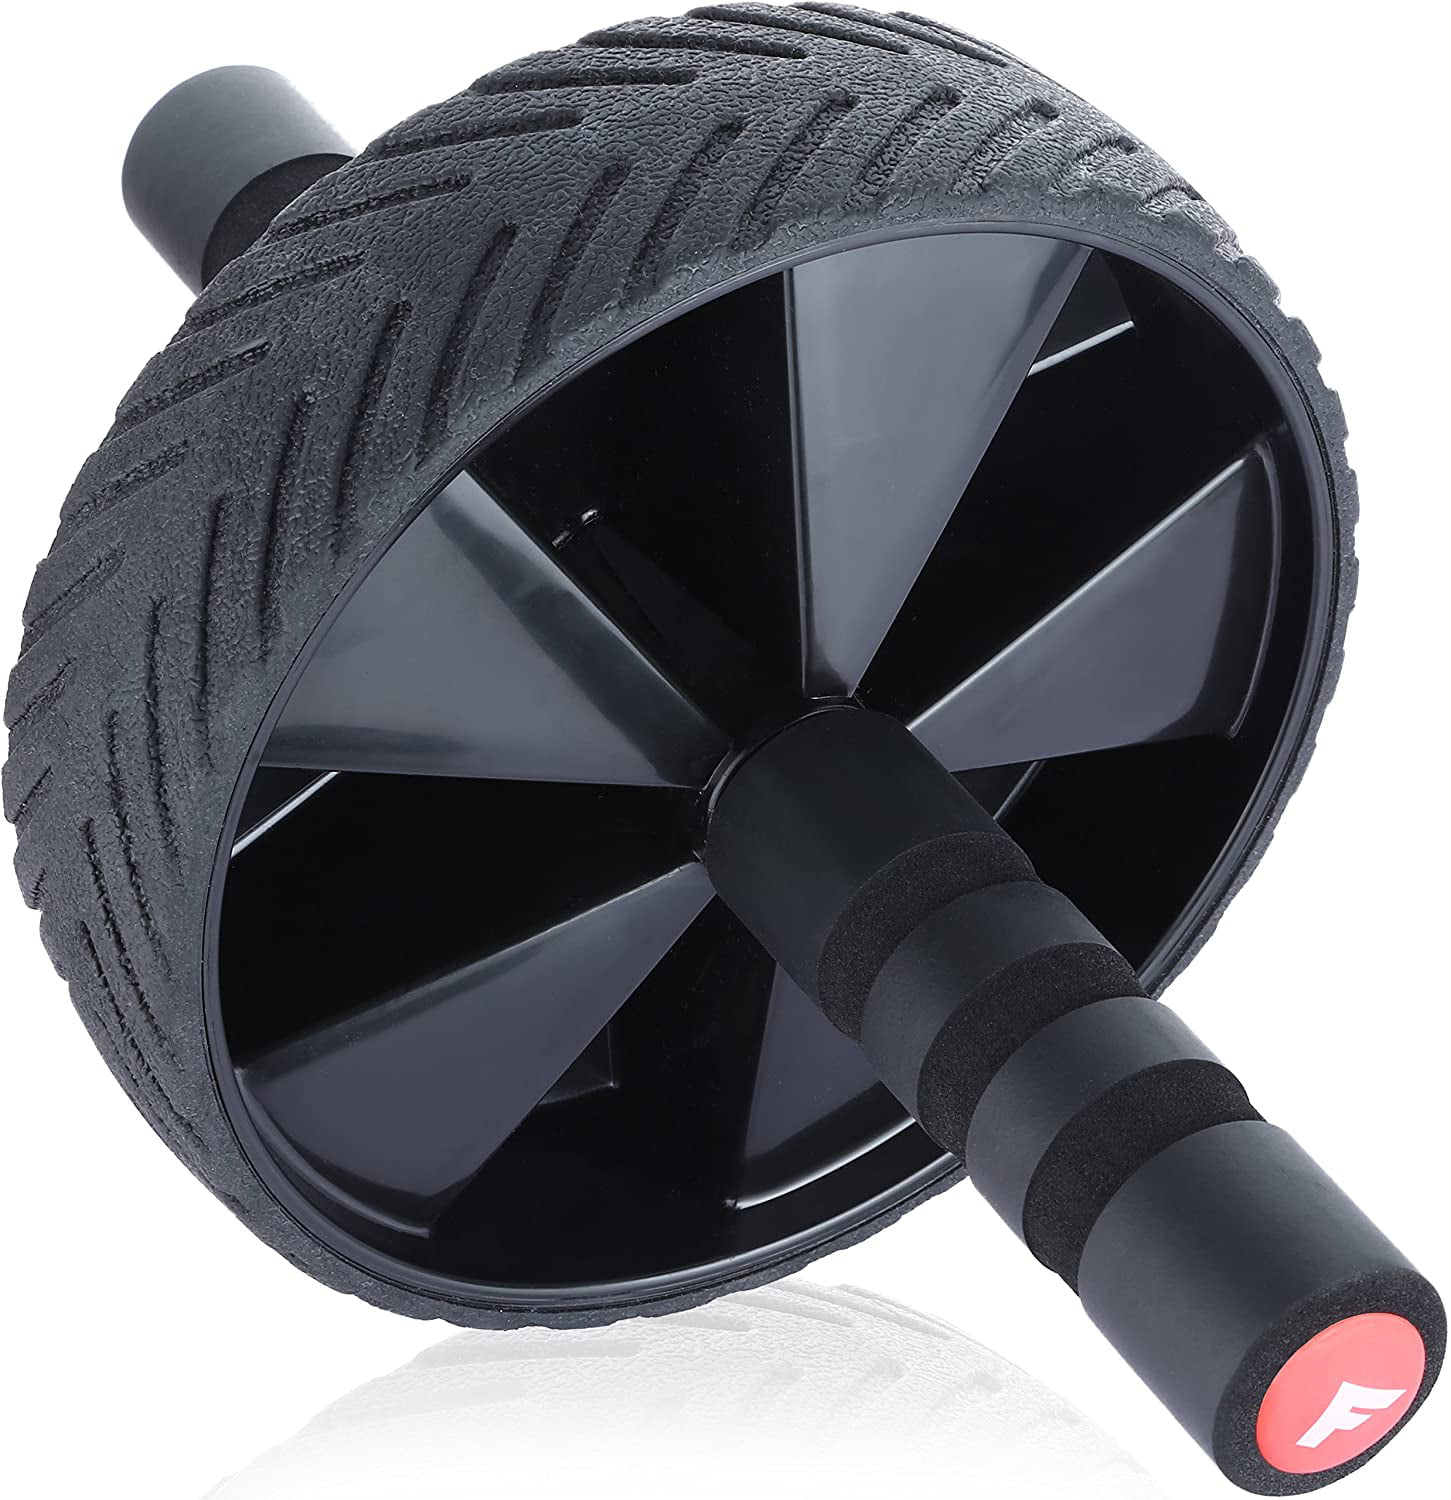 AB Abdominal Roller ABS Wheel Exercise Fitness Workout Equipment For Home Gym 